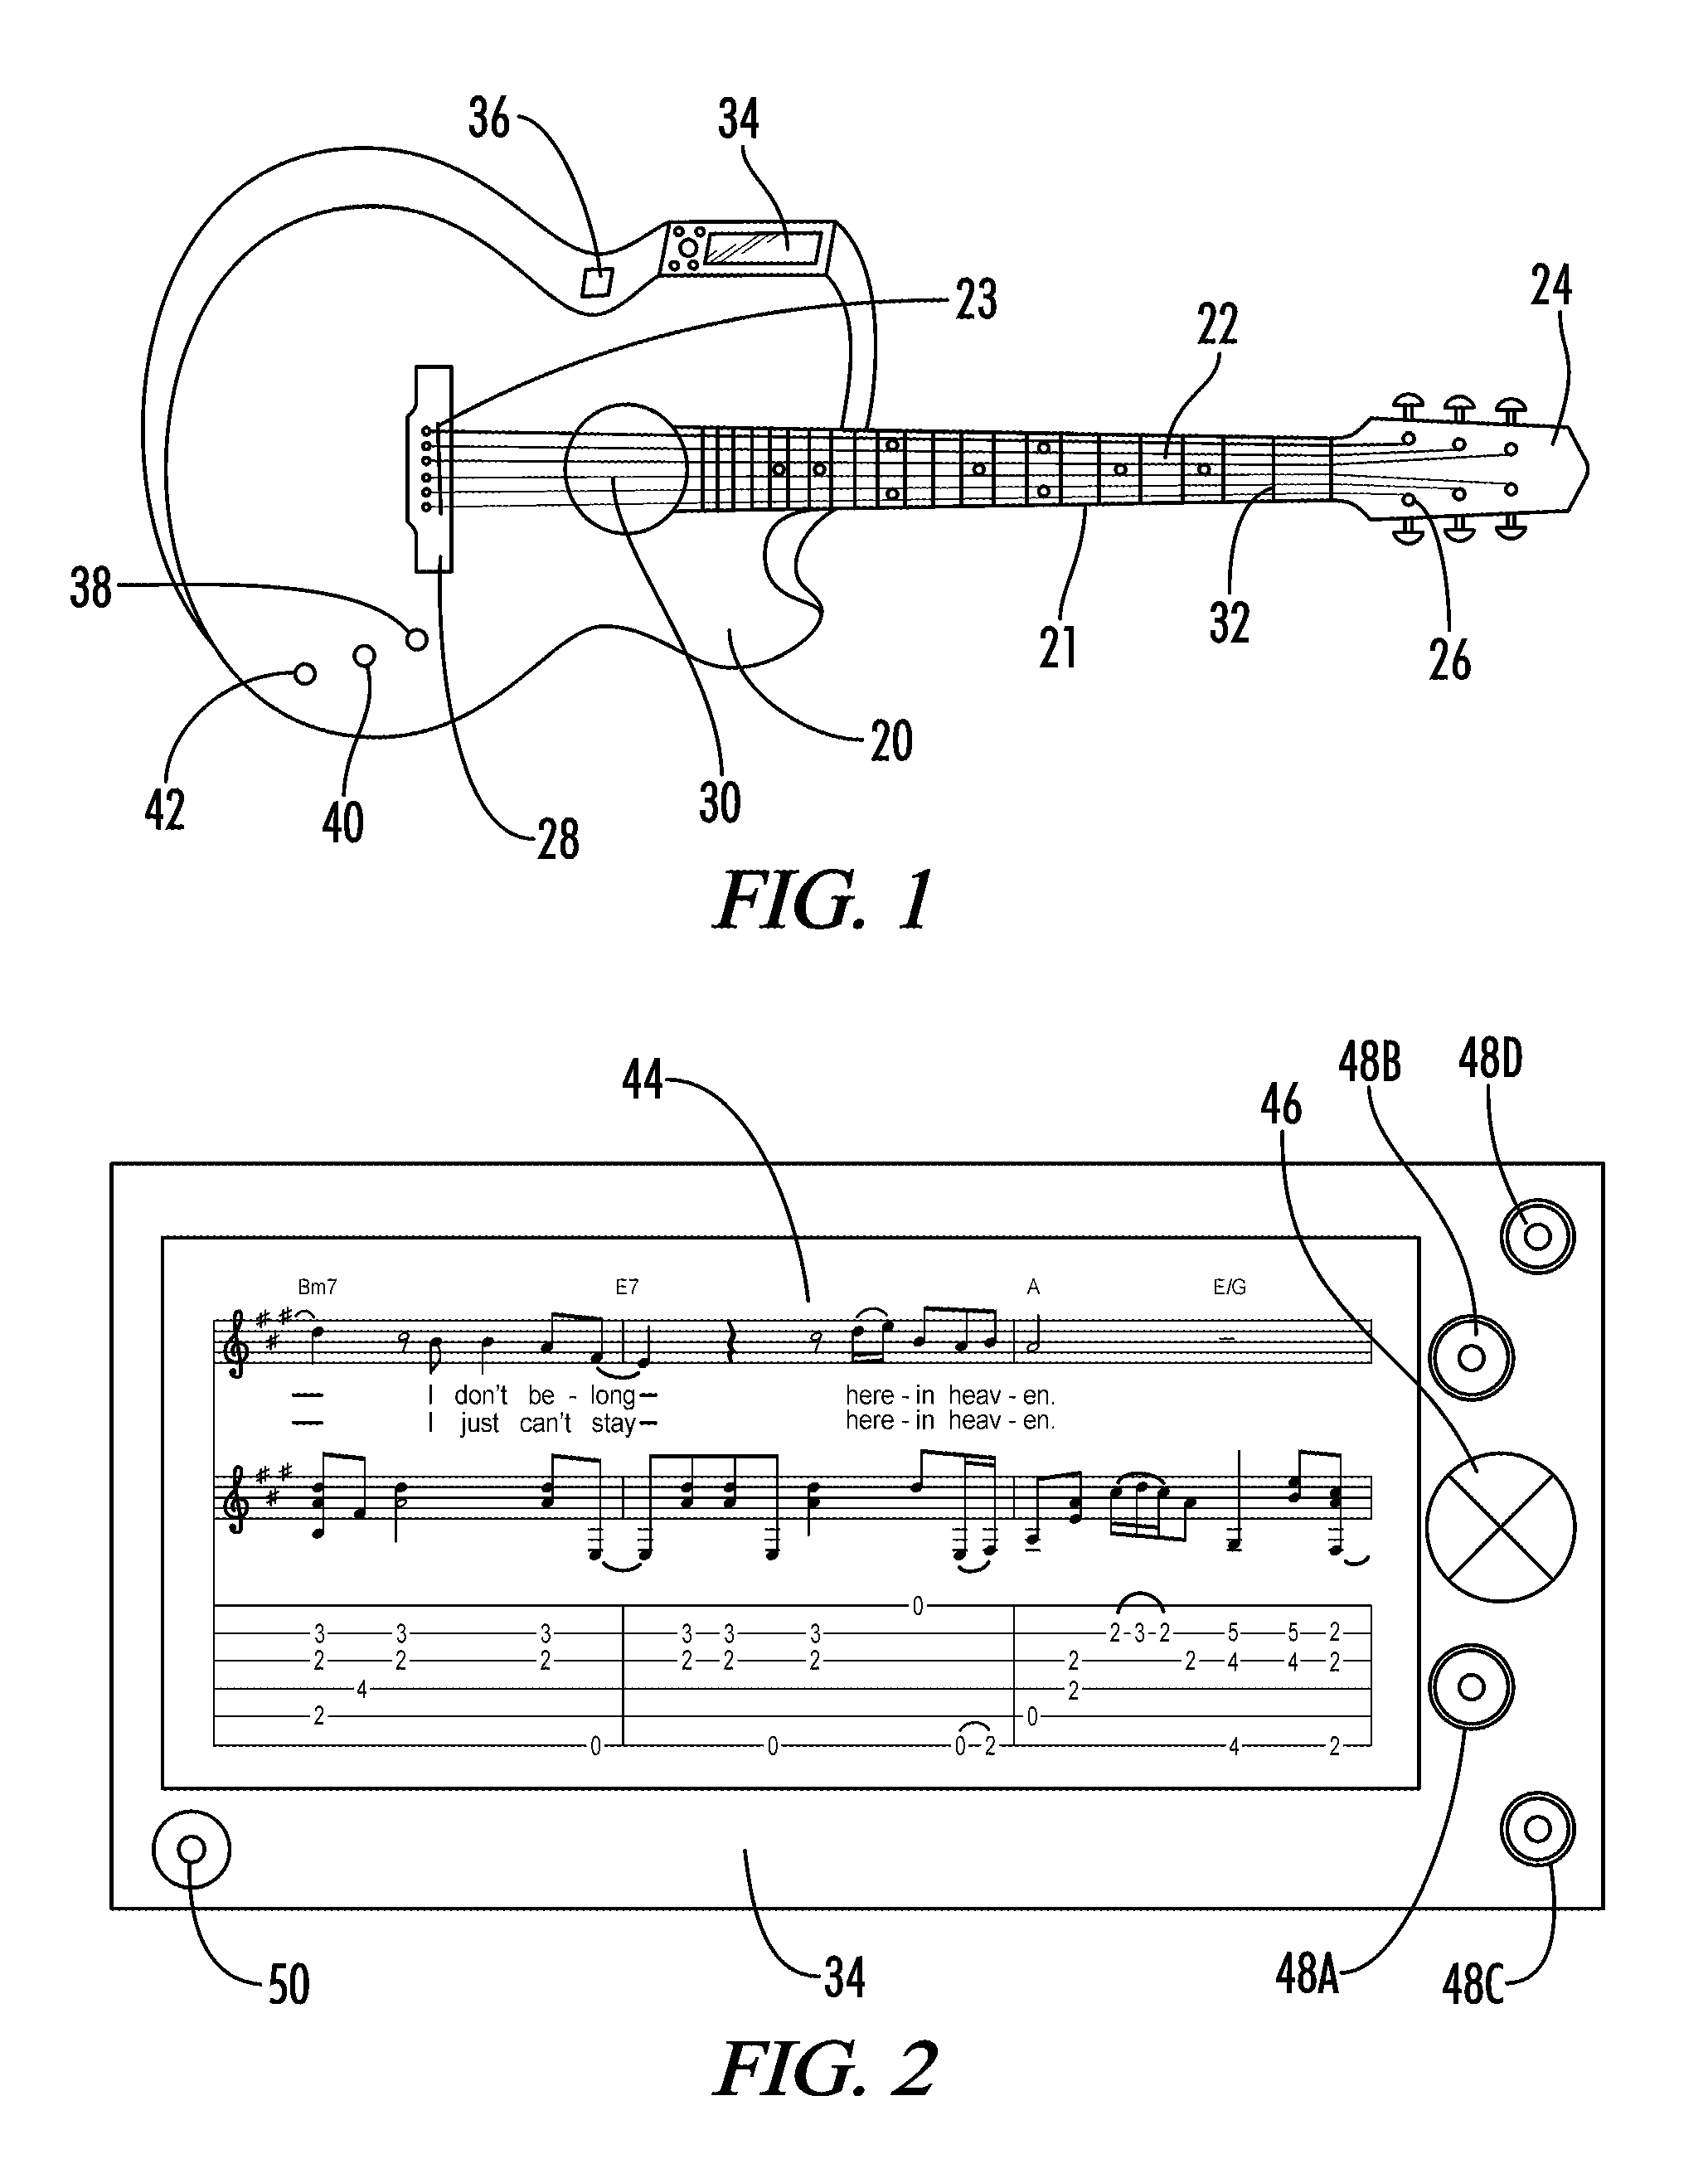 Stringed musical instrument having a built in hand-held type computer